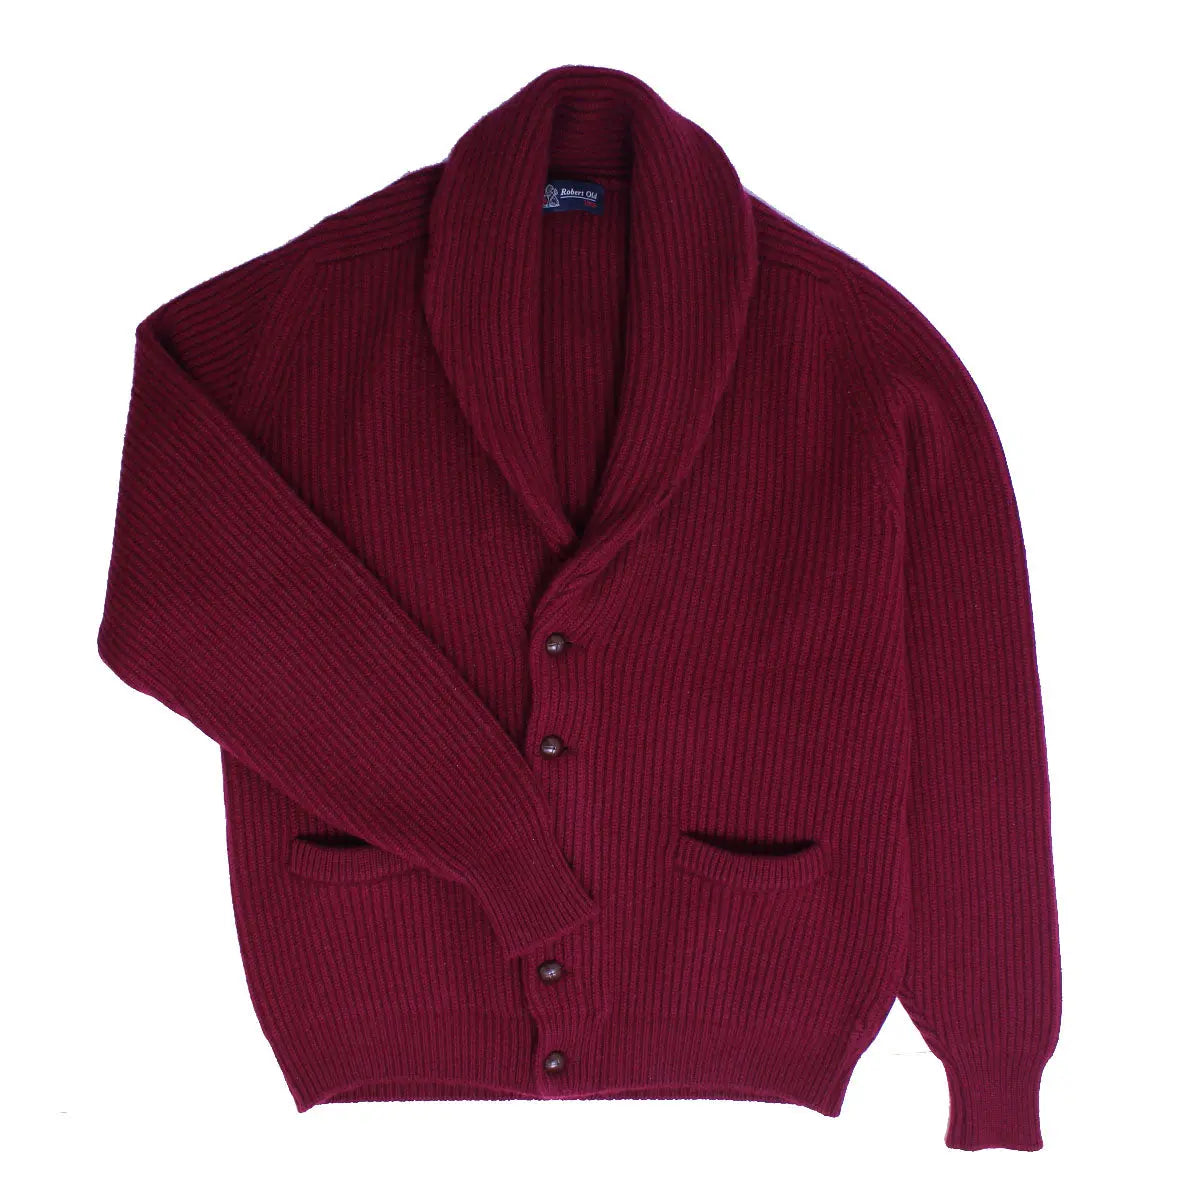 Claret Red Colonial 8ply Cashmere Shawl Cardigan  Robert Old Claret UK 50" 